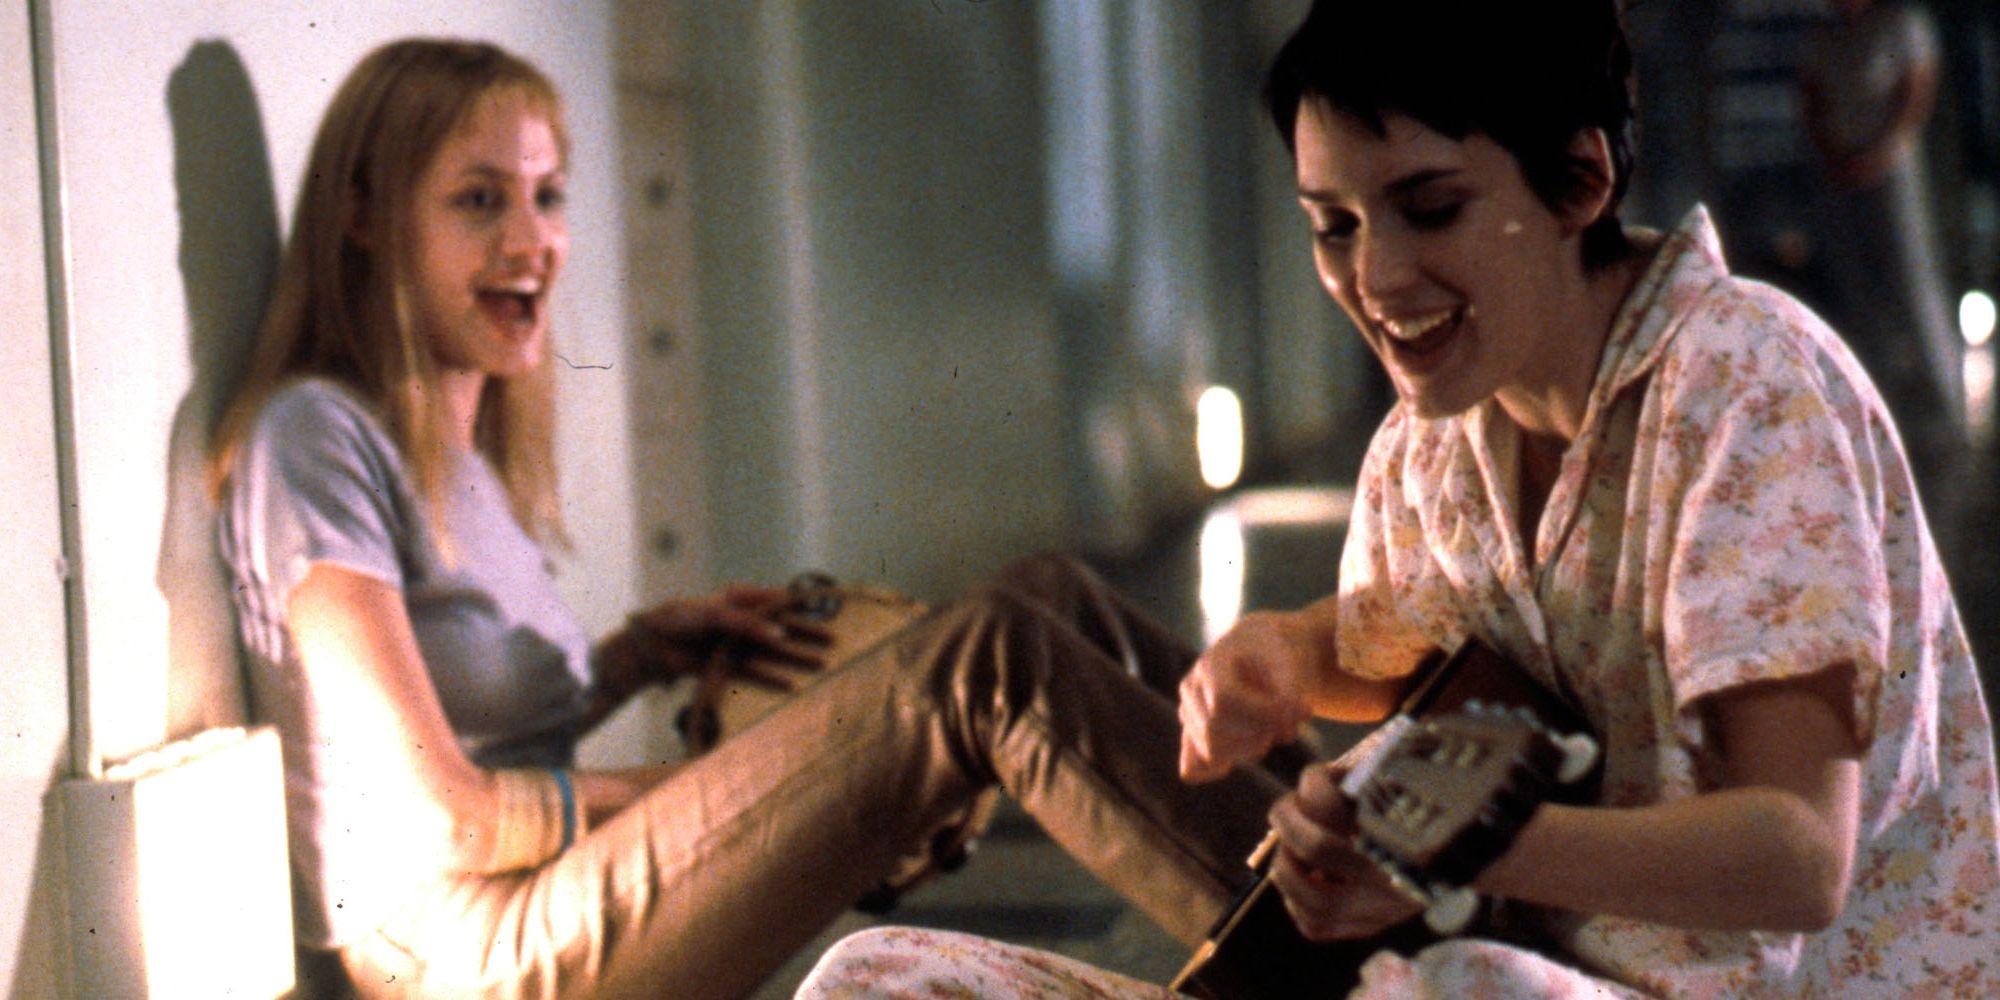 Susanna playing guitar for Lisa in Girl, Interrupted